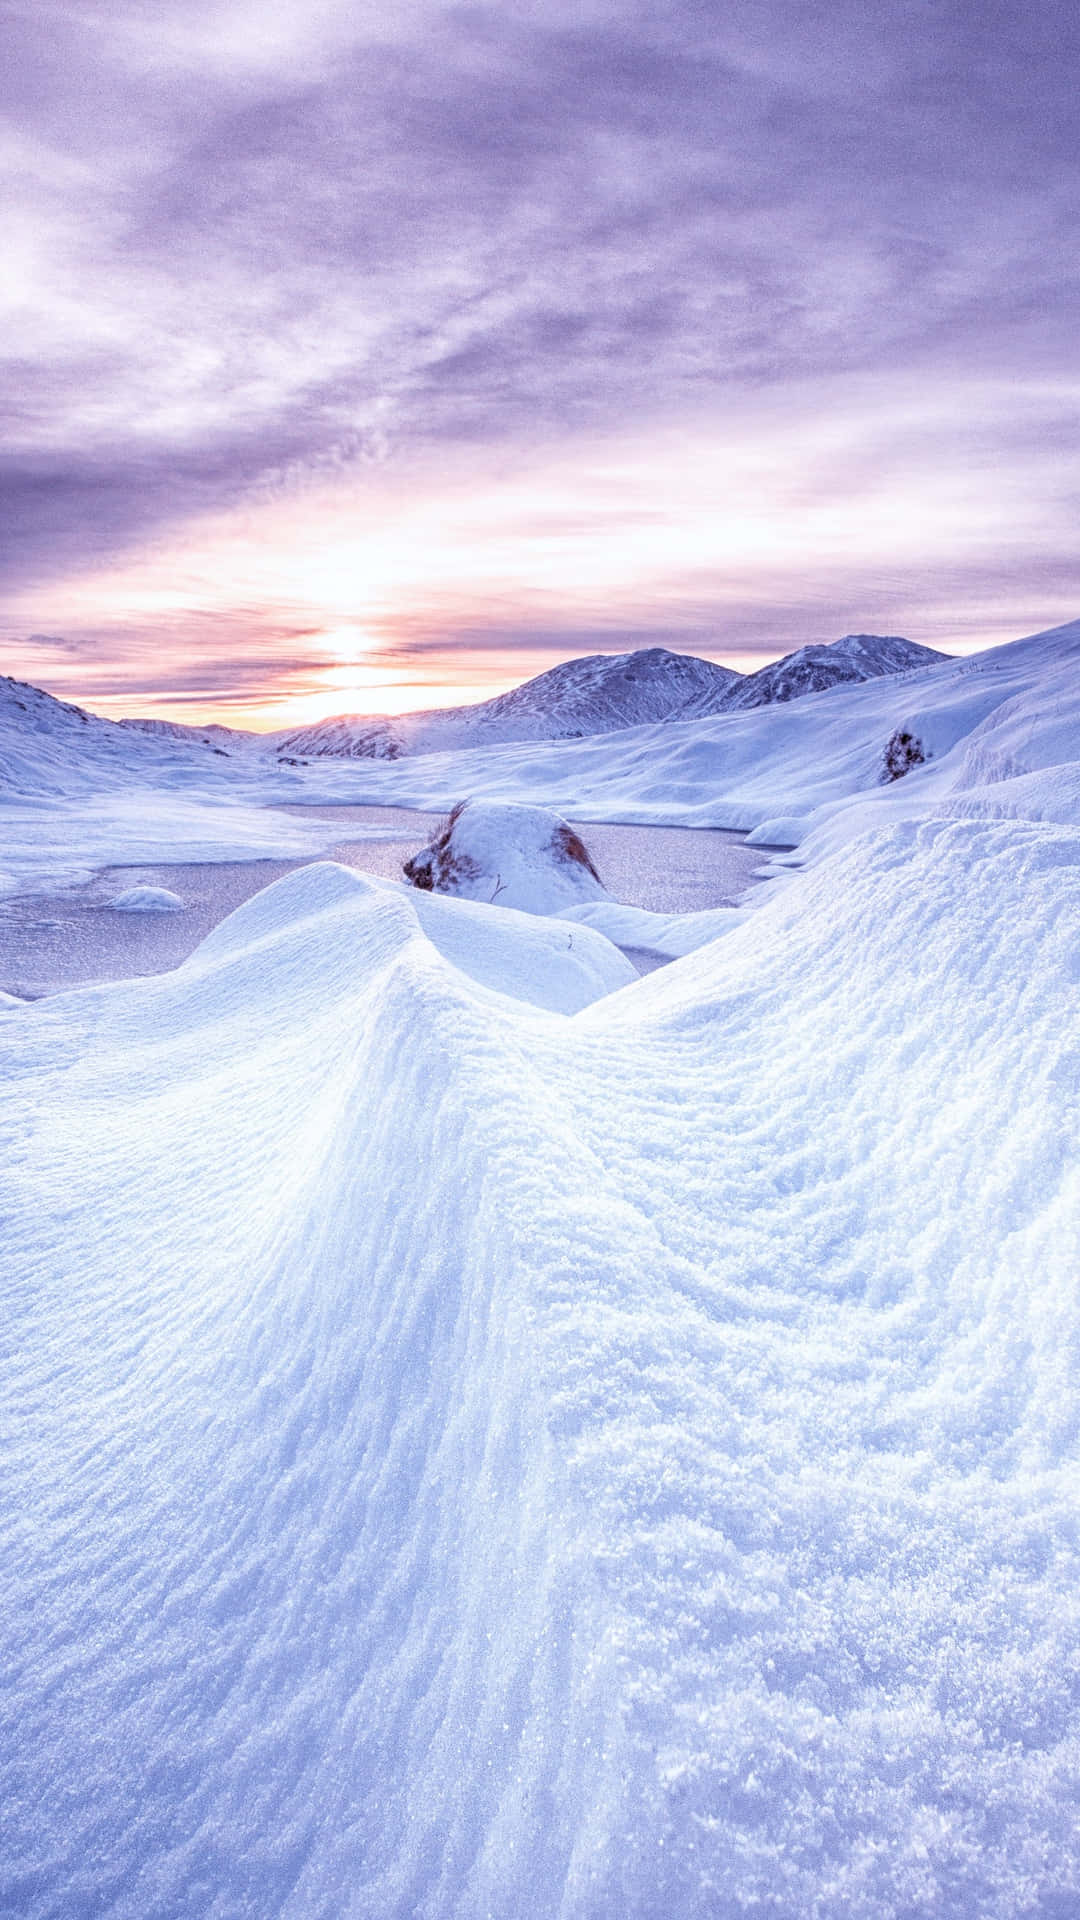 A Snow Covered Landscape With A Sunset